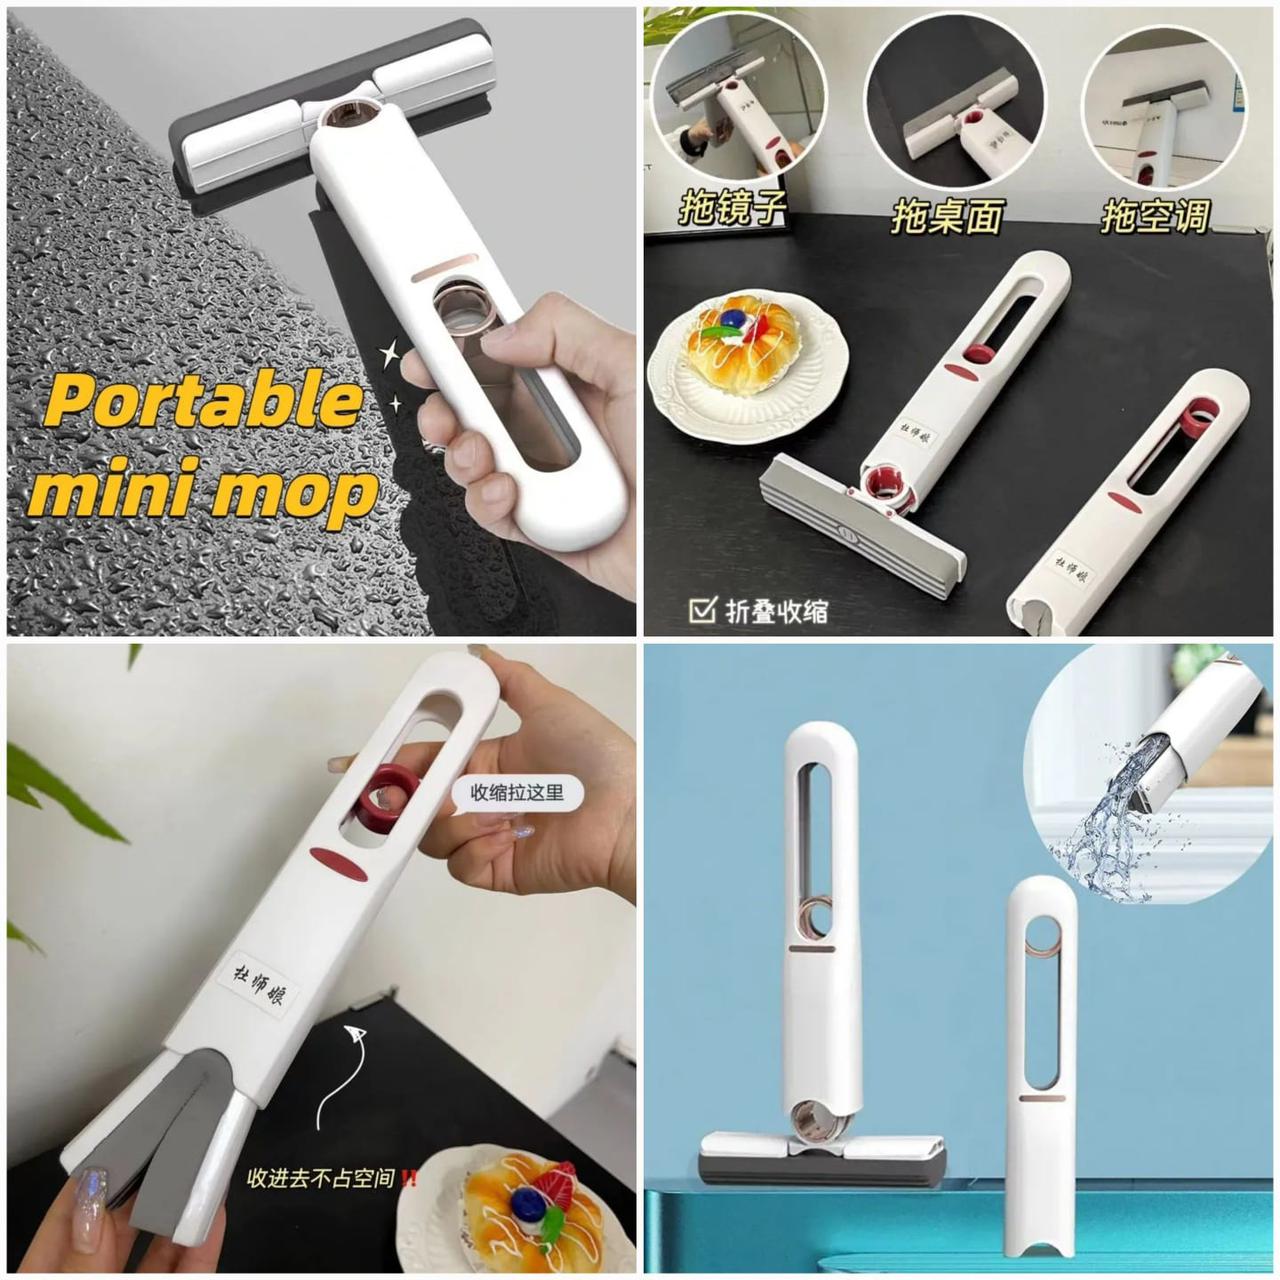 PORTABLE MINI MOP HOME KITCHEN CLEANING TOOL